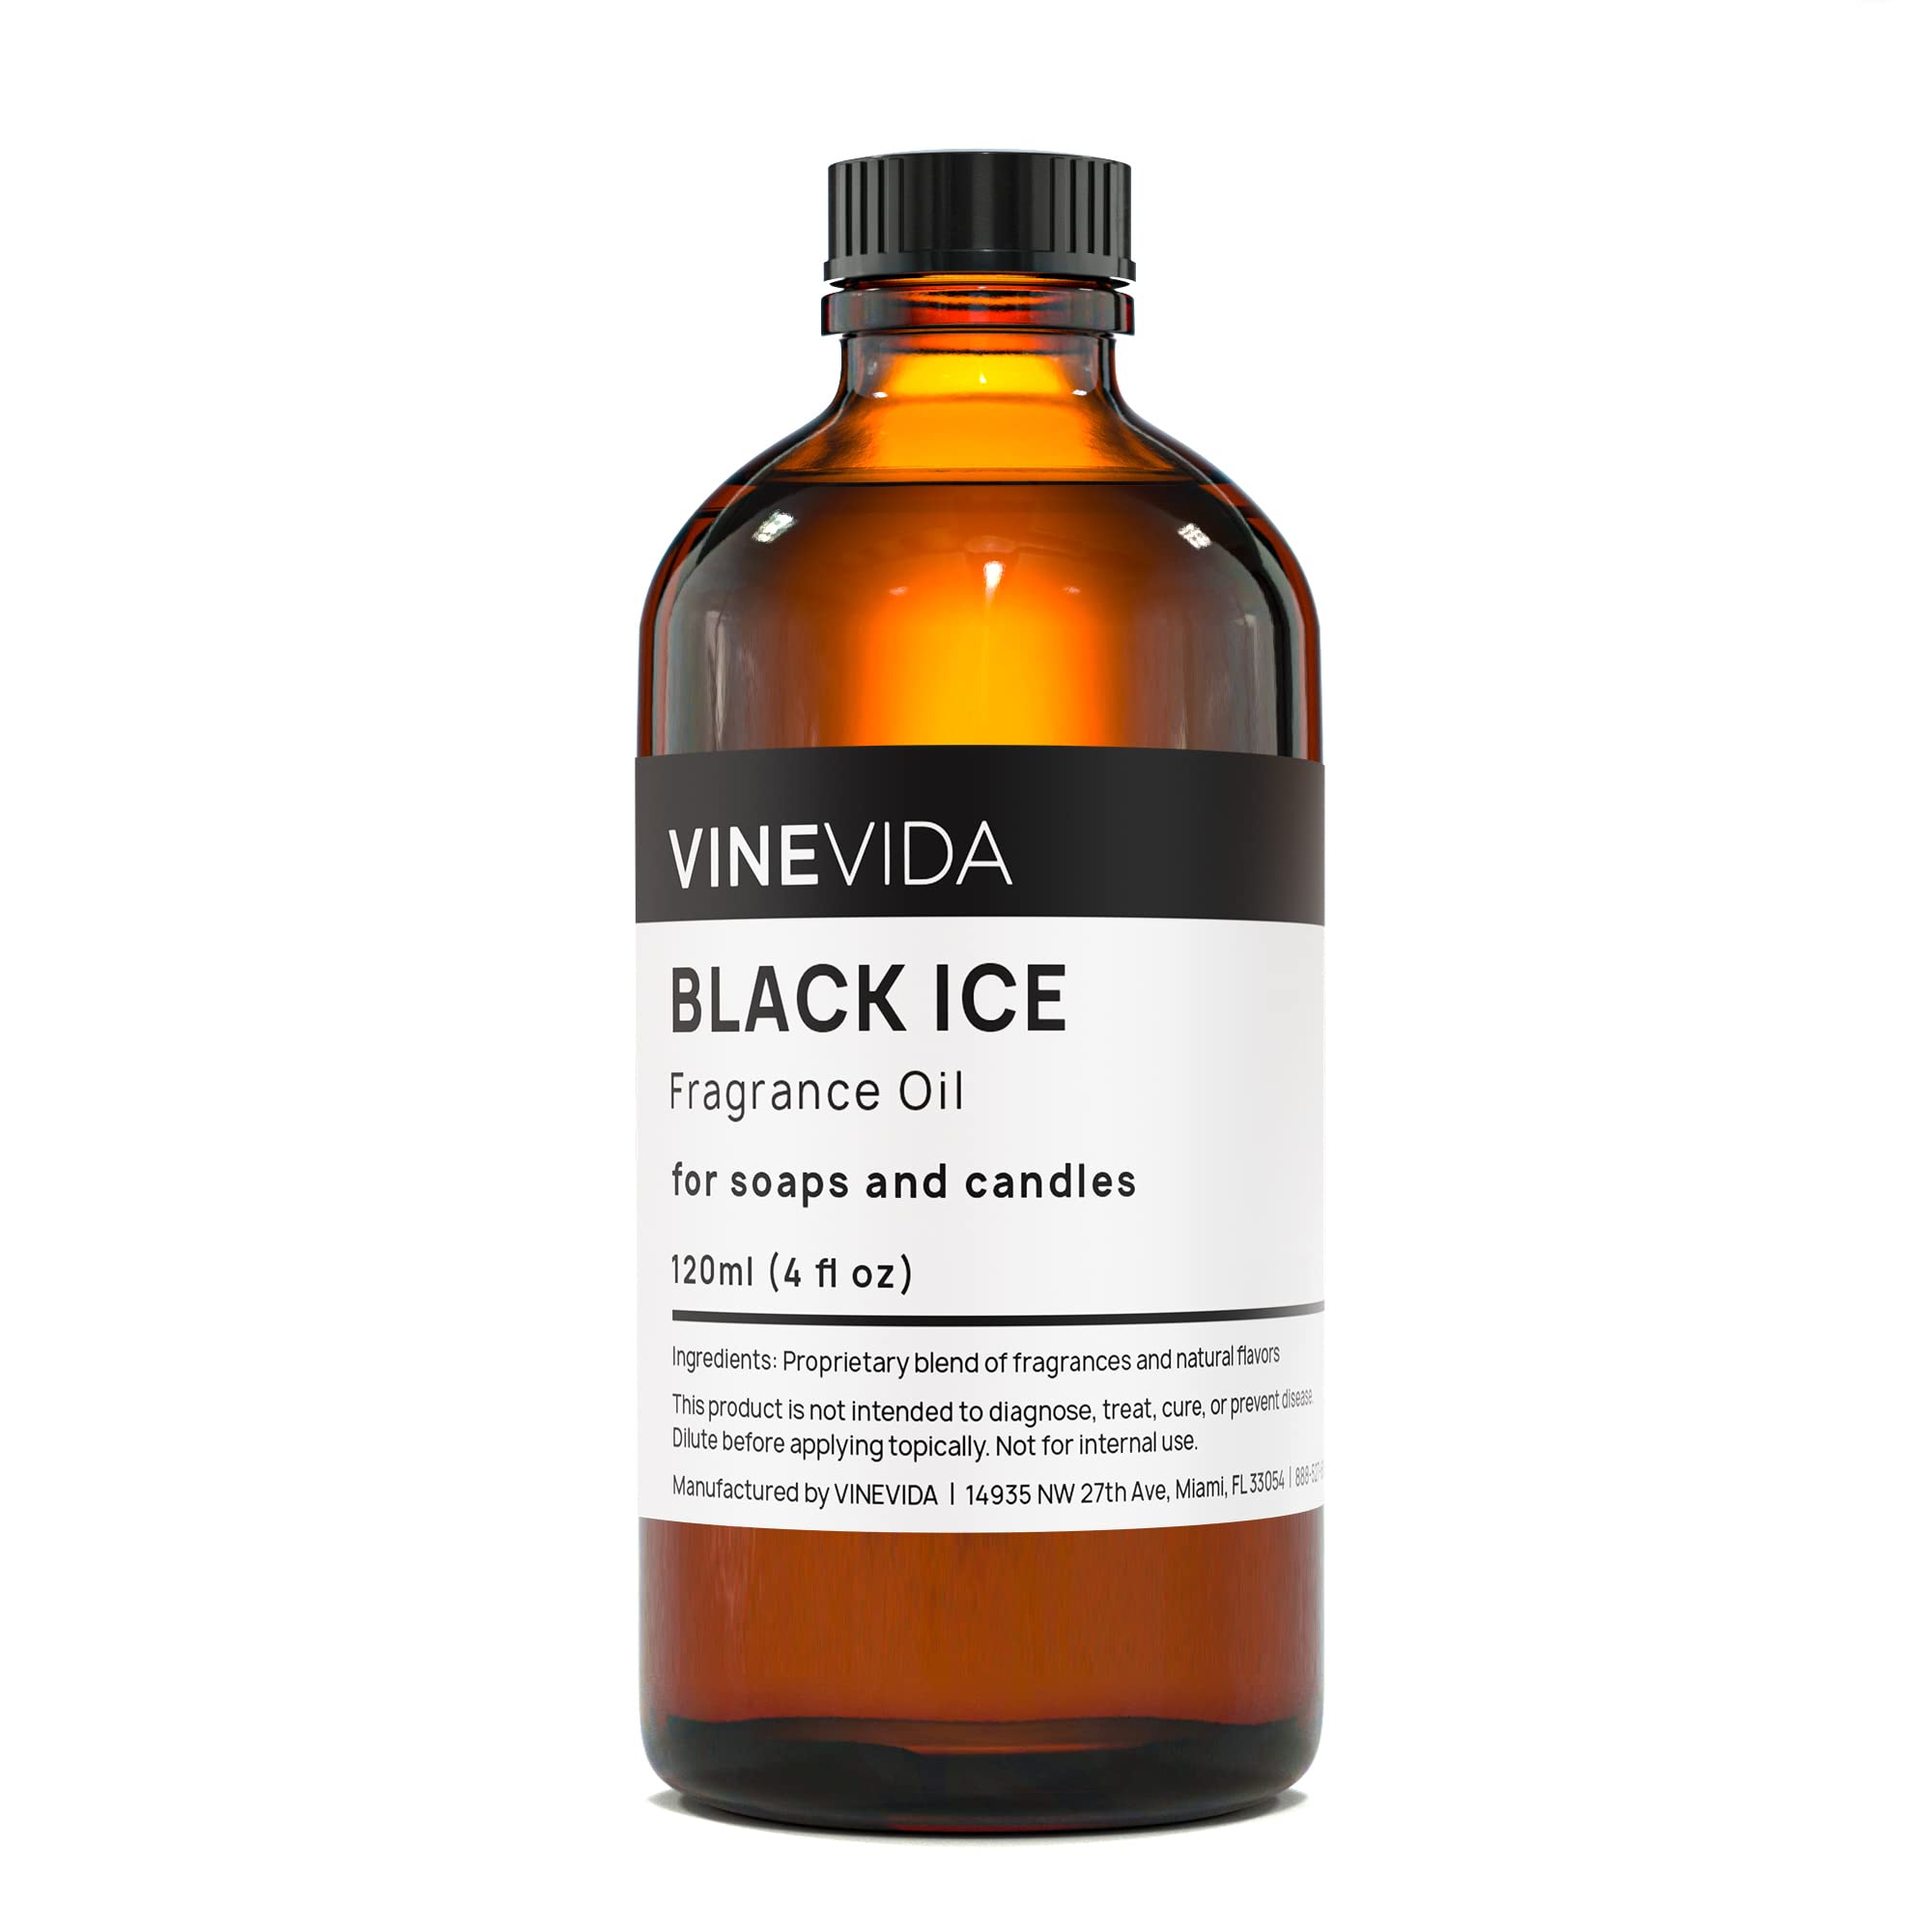 Black Ice Type Fragrance Oil (1 oz bottle) Premium Grade - Designed to Be used in Candles, Soaps, Wax Melts Snap Bars, Body Products, Room Sprays